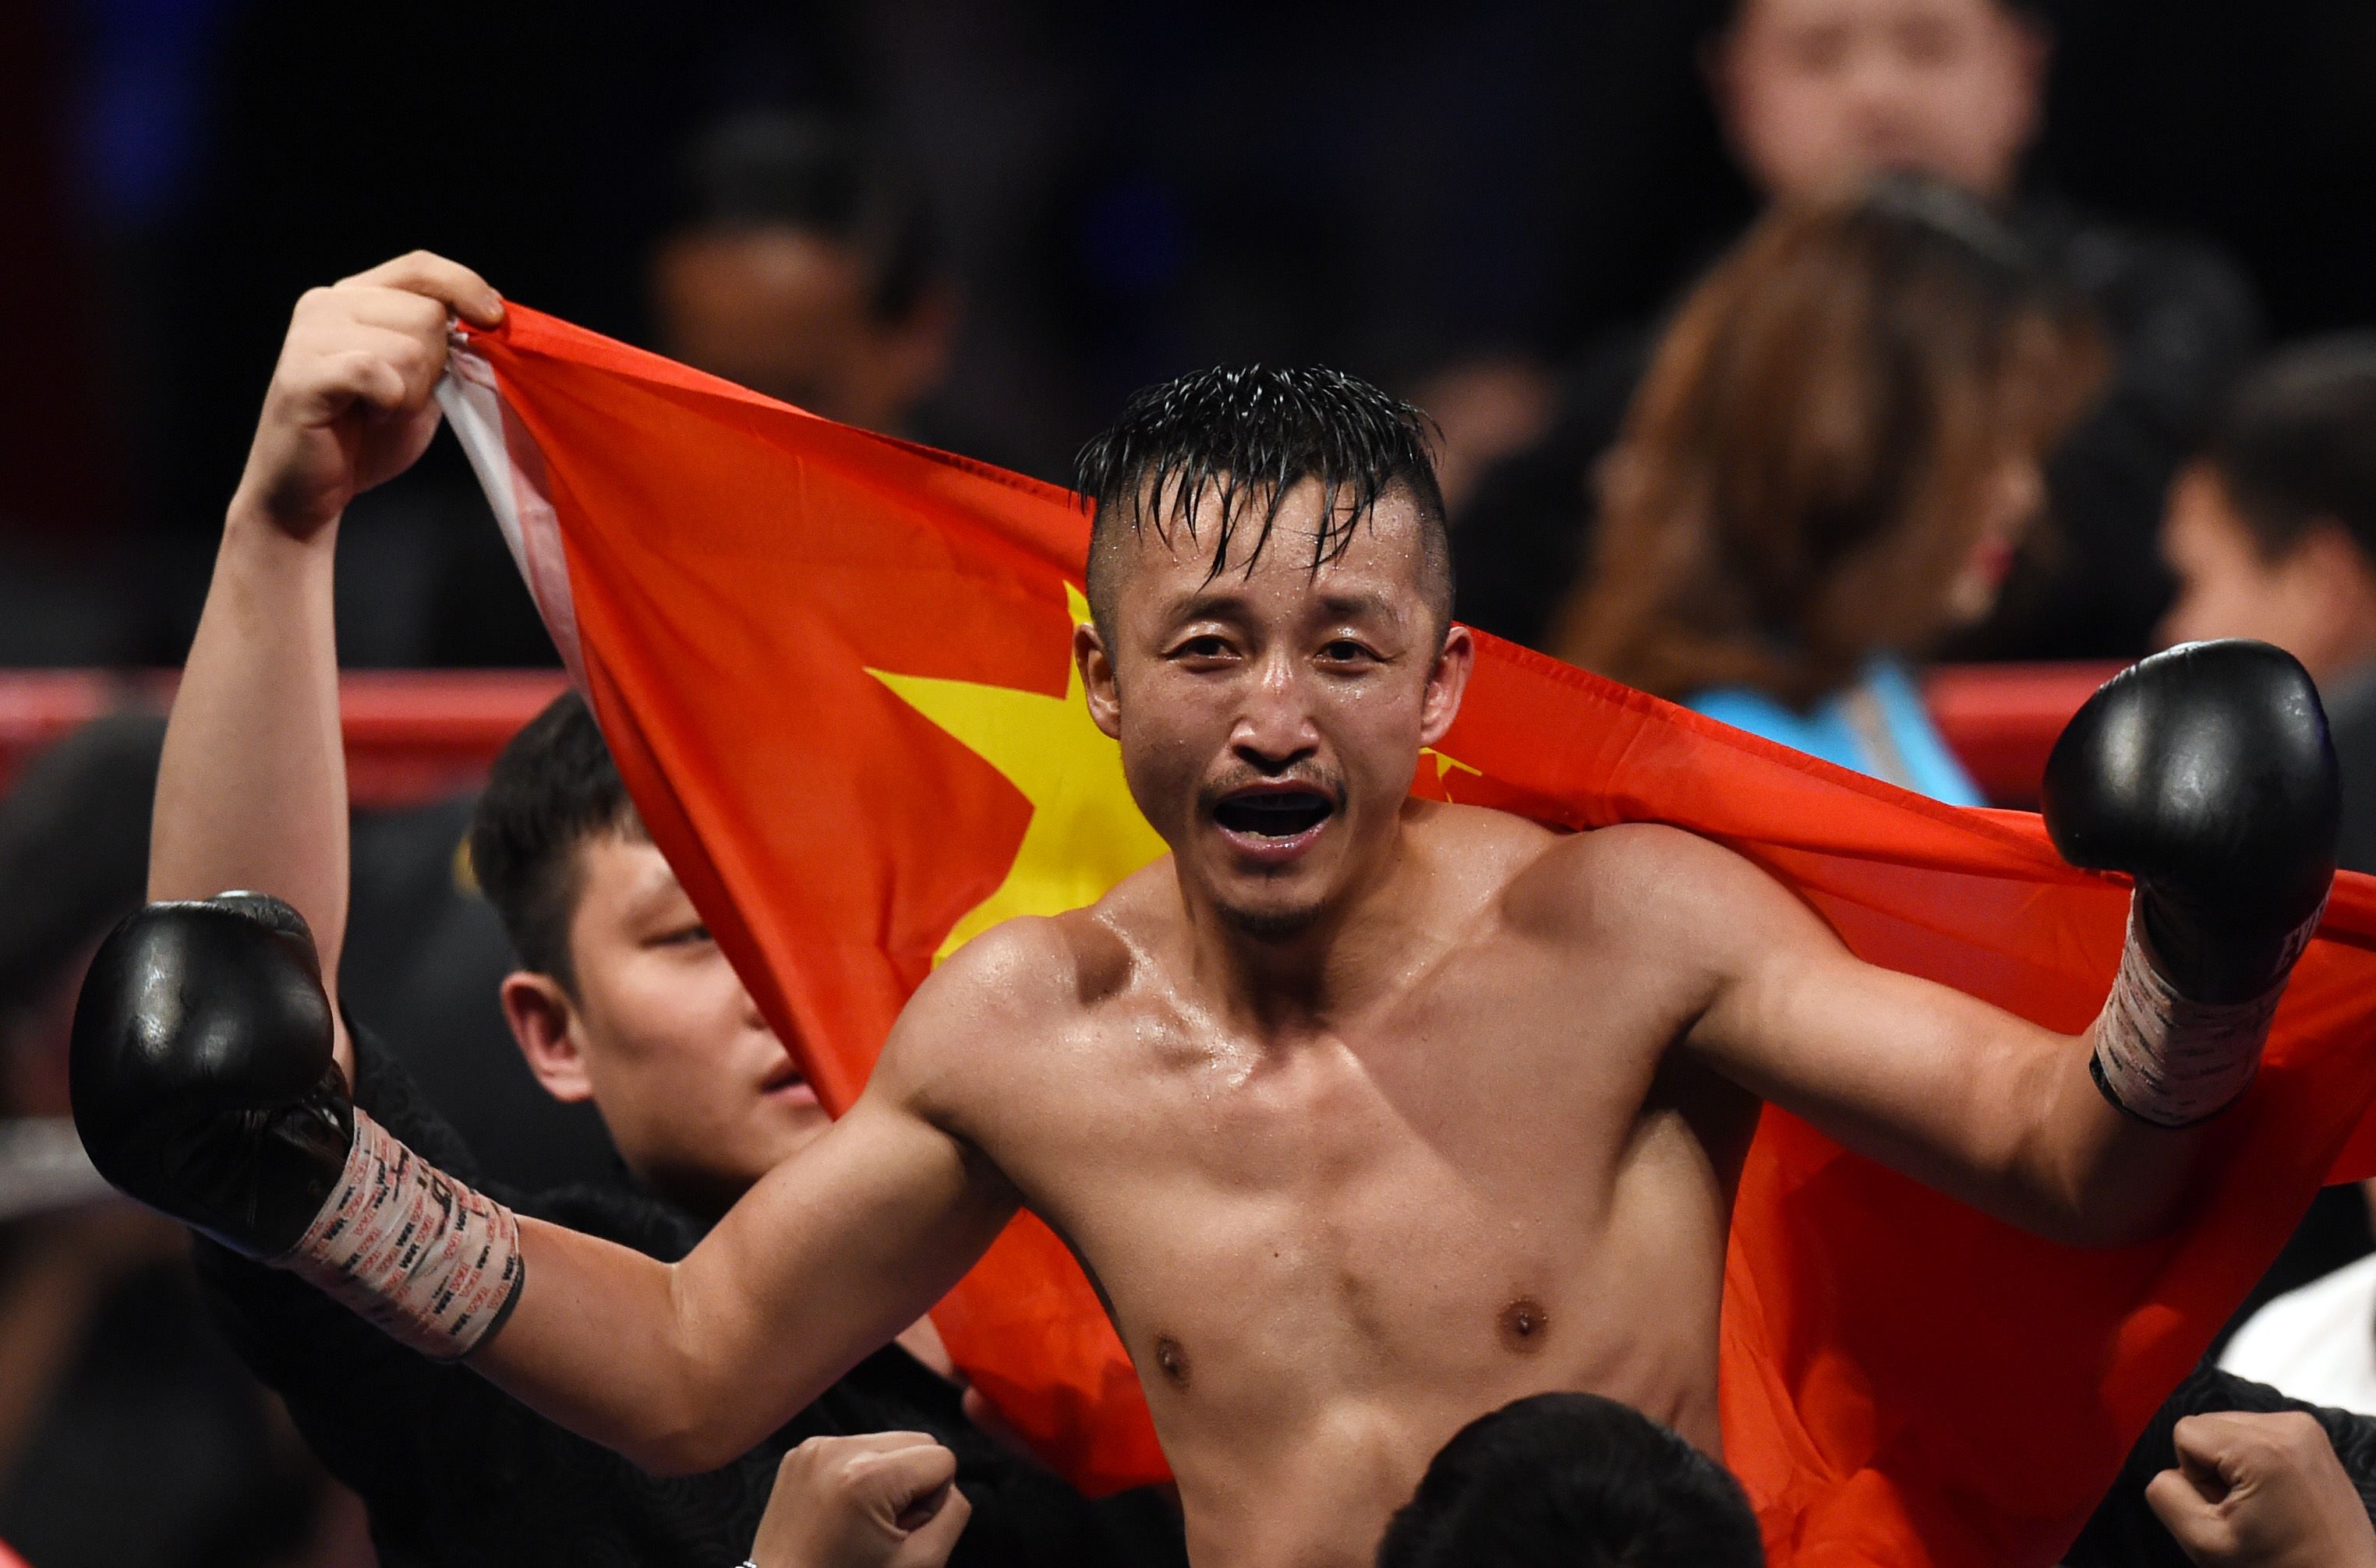 Zou Shiming of China celebrates after winning against Natan Coutinho of Brazil in their WBO international flyweight boxing title bout in Shanghai on January 30, 2016. AFP PHOTO / JOHANNES EISELE